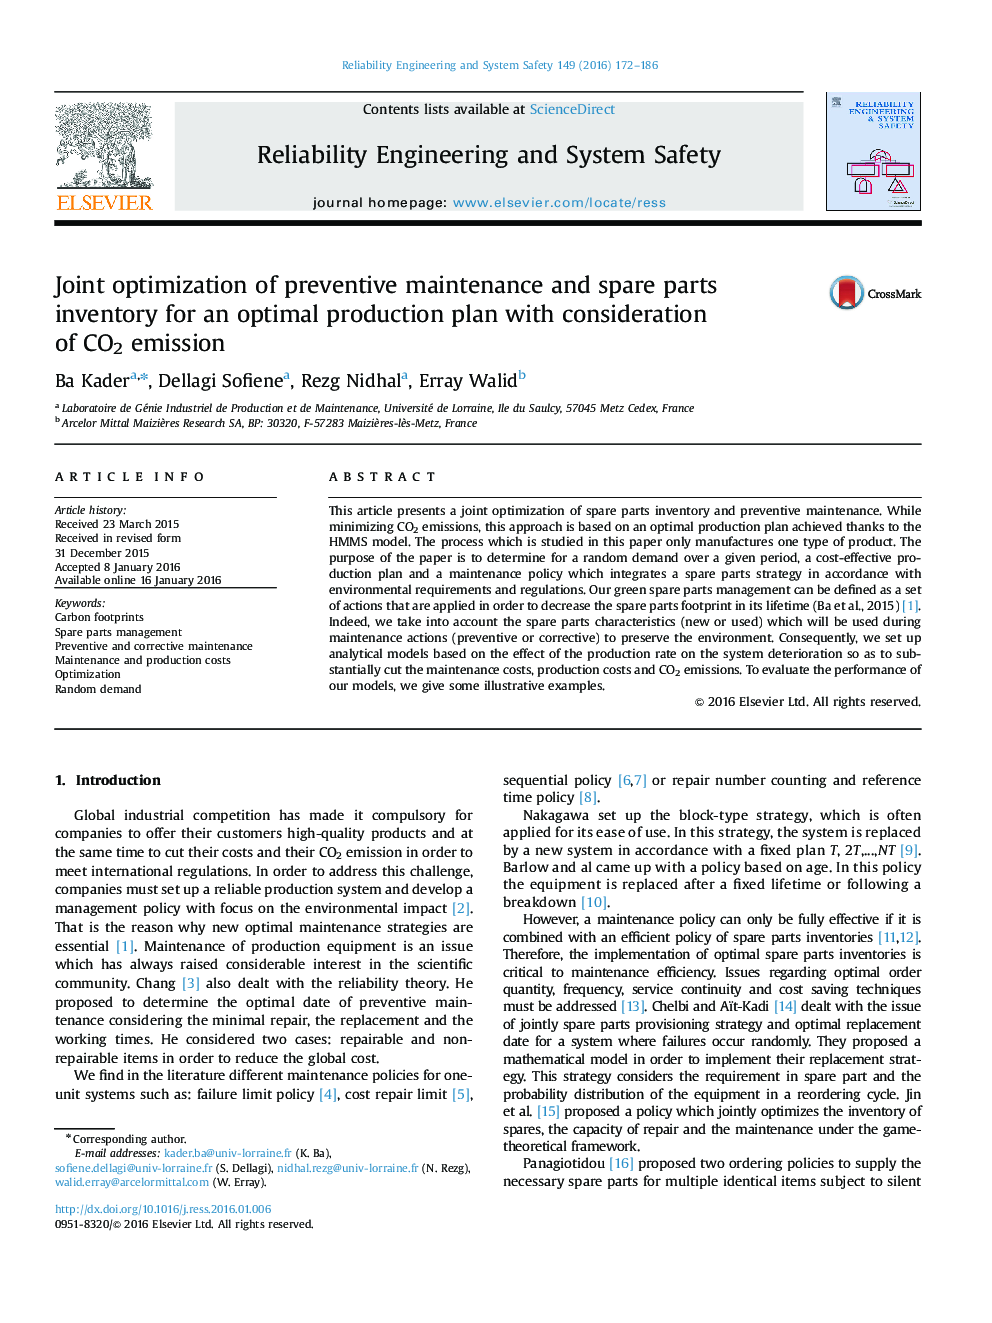 Joint optimization of preventive maintenance and spare parts inventory for an optimal production plan with consideration of CO2 emission